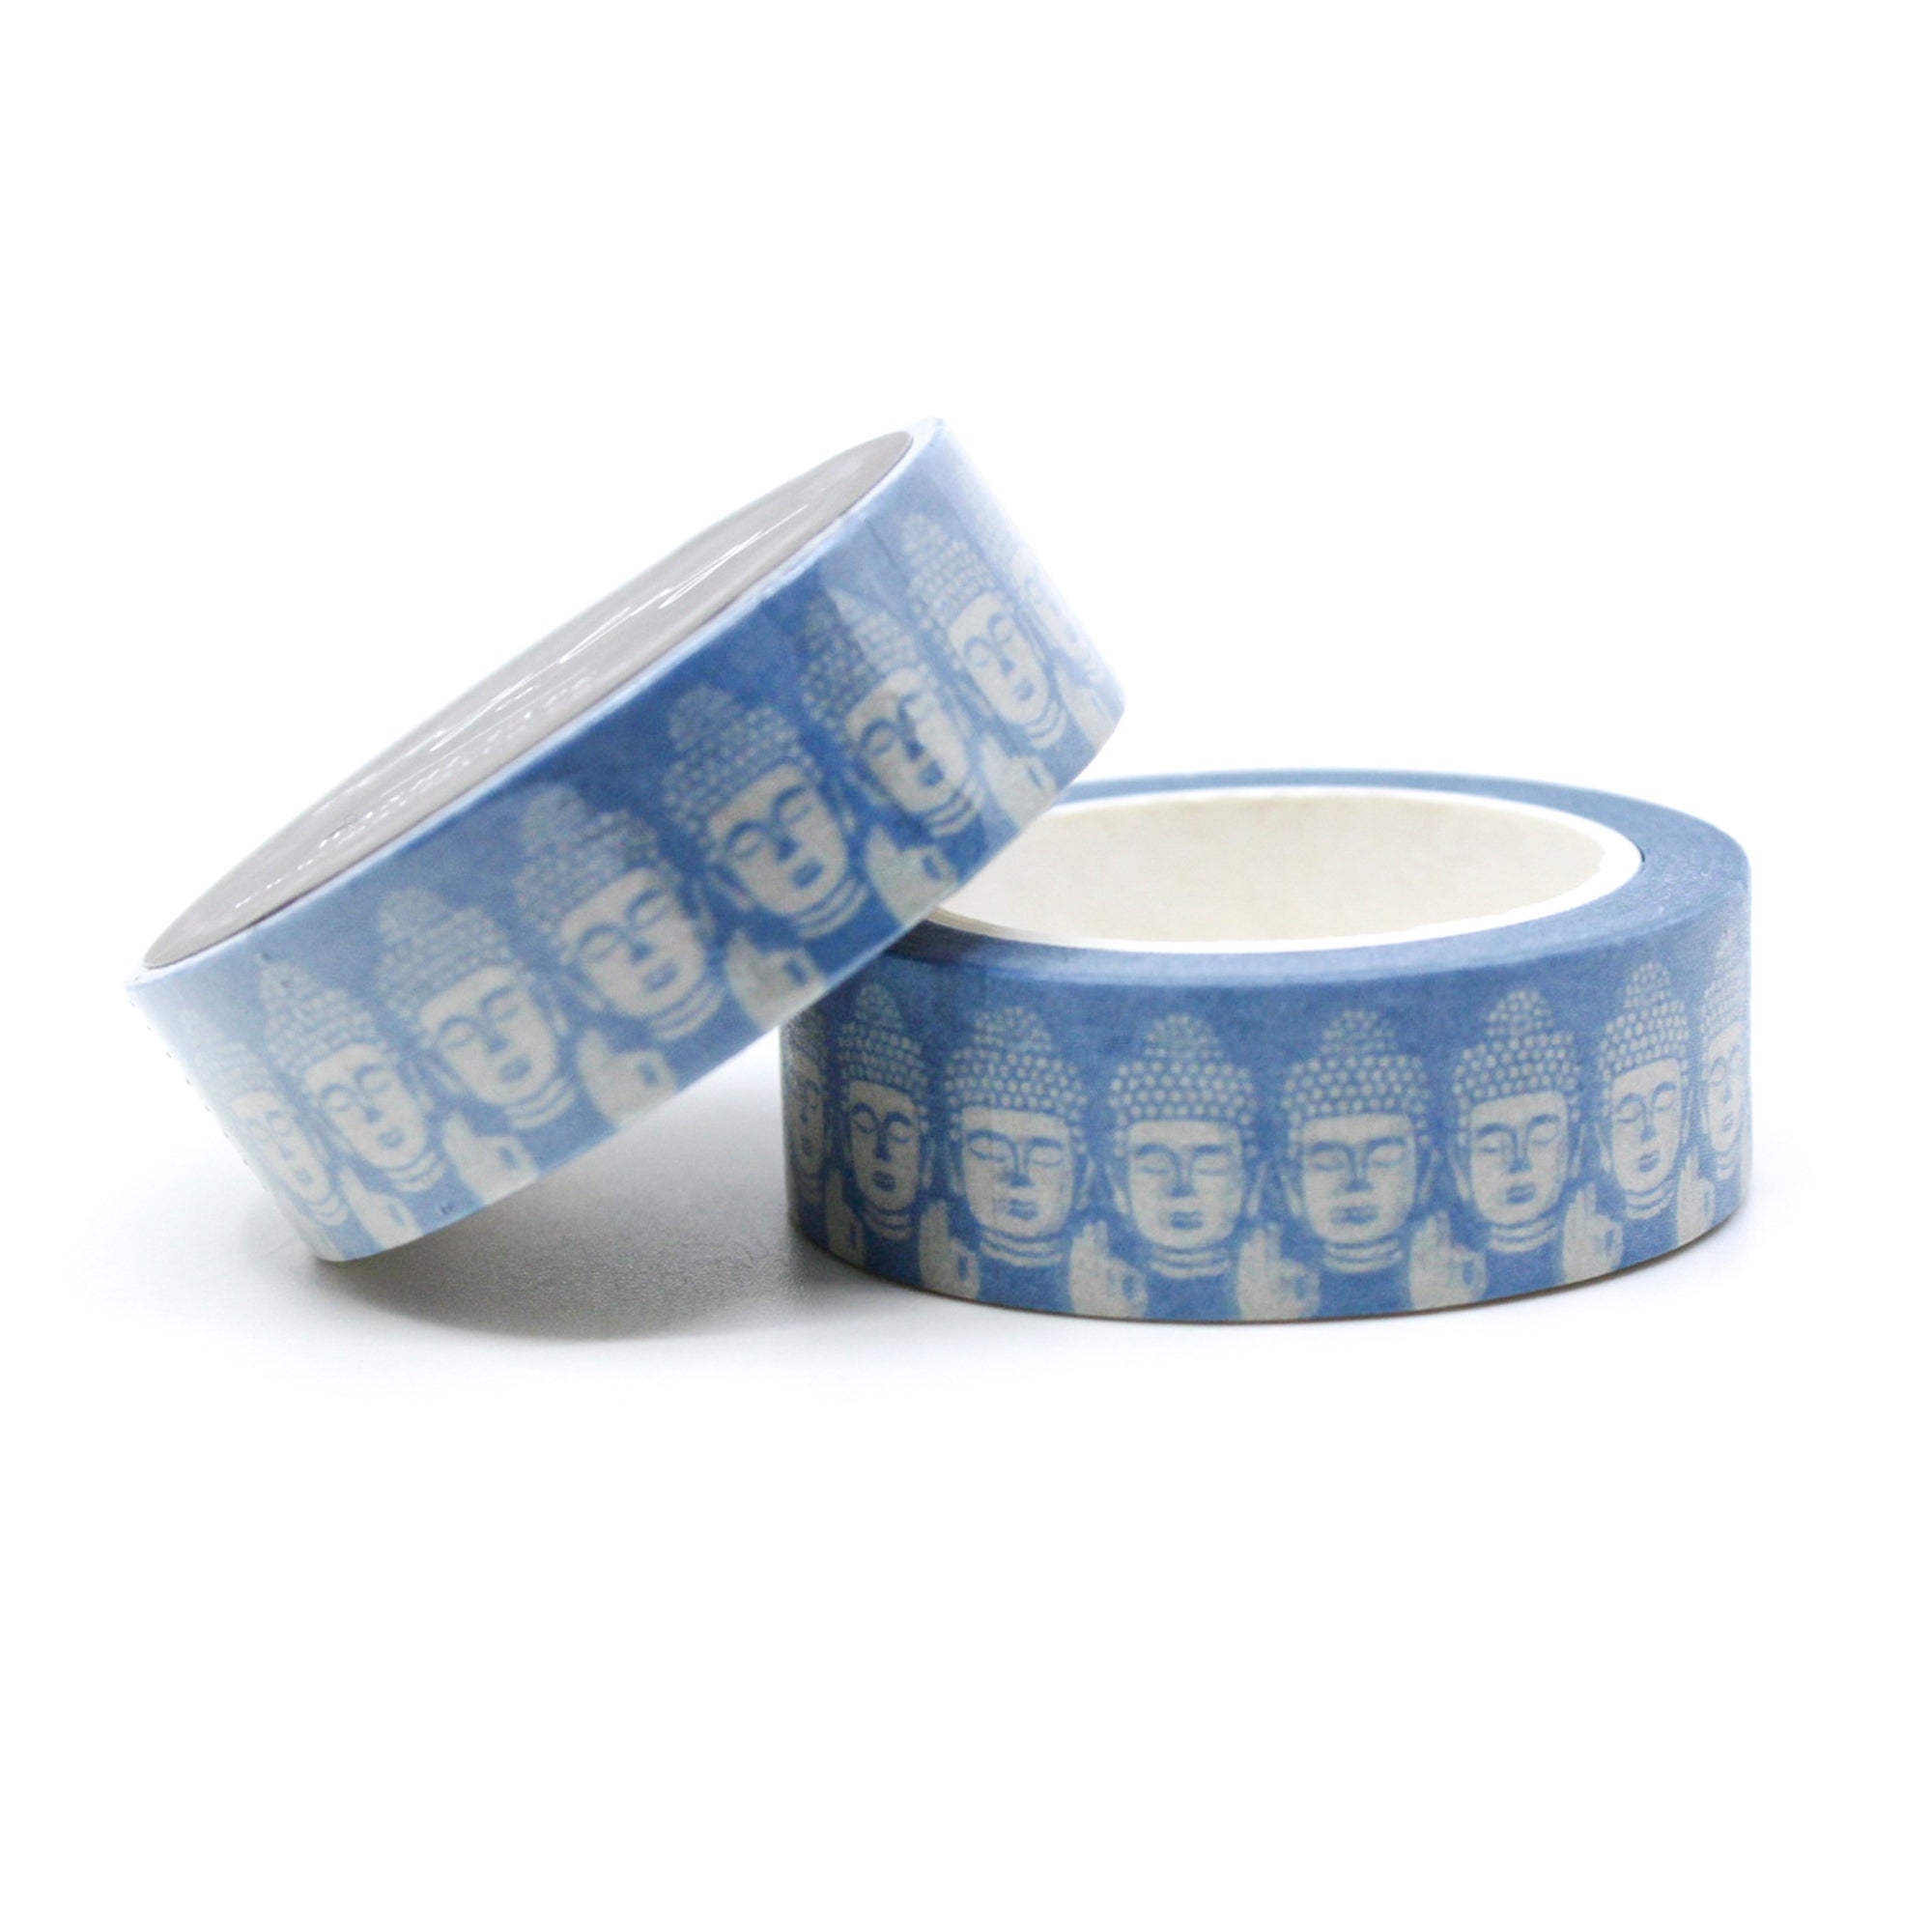 Find inner peace with our 'Be Still' Meditation Washi Tape, adorned with a calming and meditative design. Ideal for adding a touch of serenity and mindfulness to your projects. This tape is from Maylay Co. and sold at BBB Supplies Craft Shop.